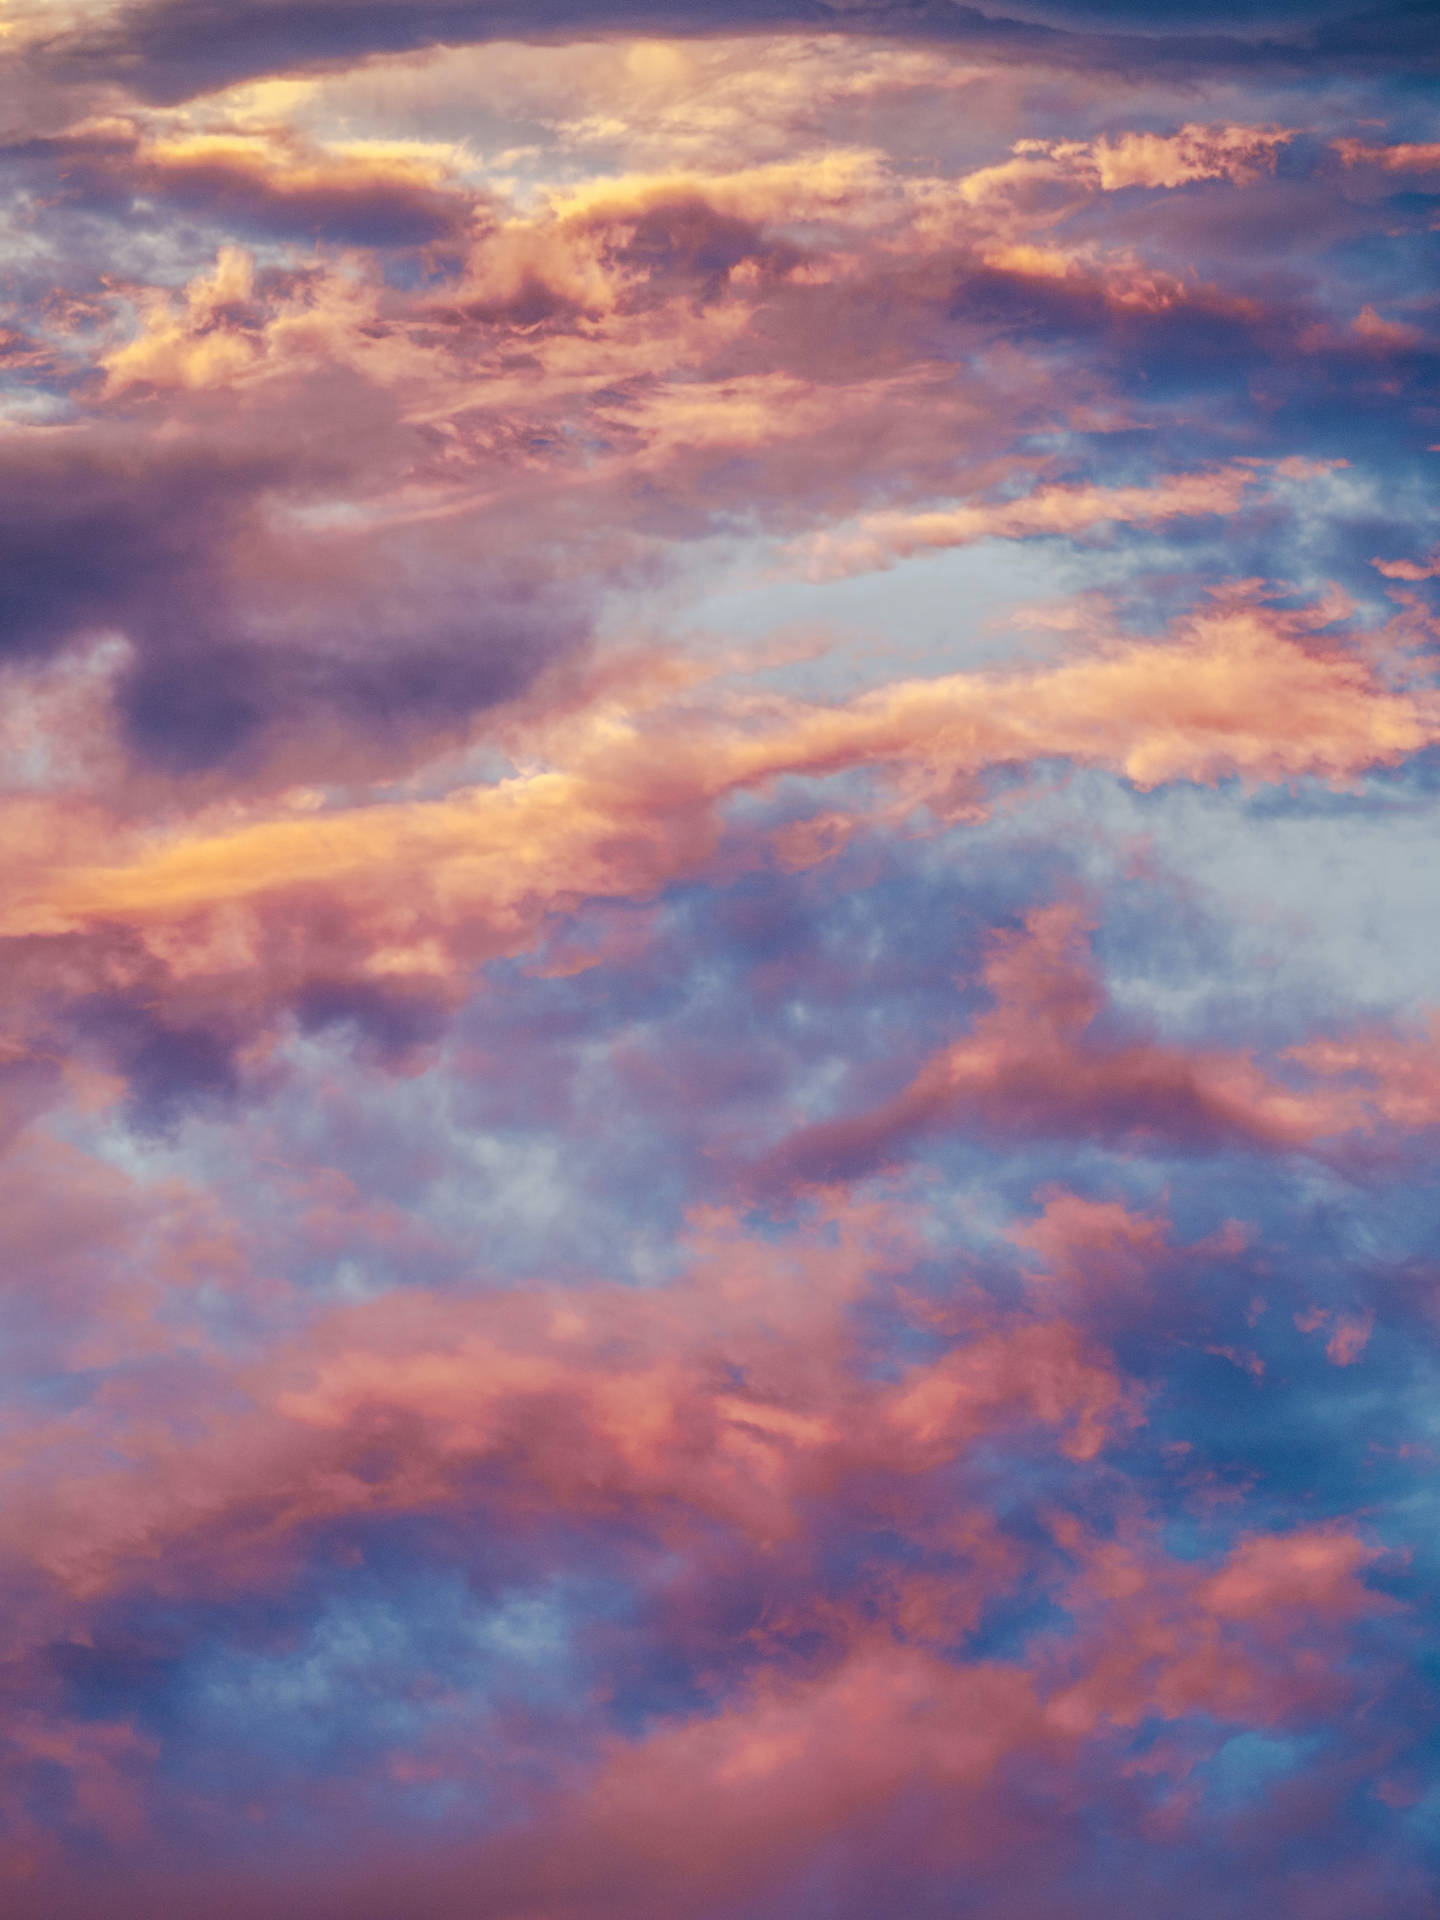 Aesthetic Pink And Blue Cloudy Sky Wallpaper